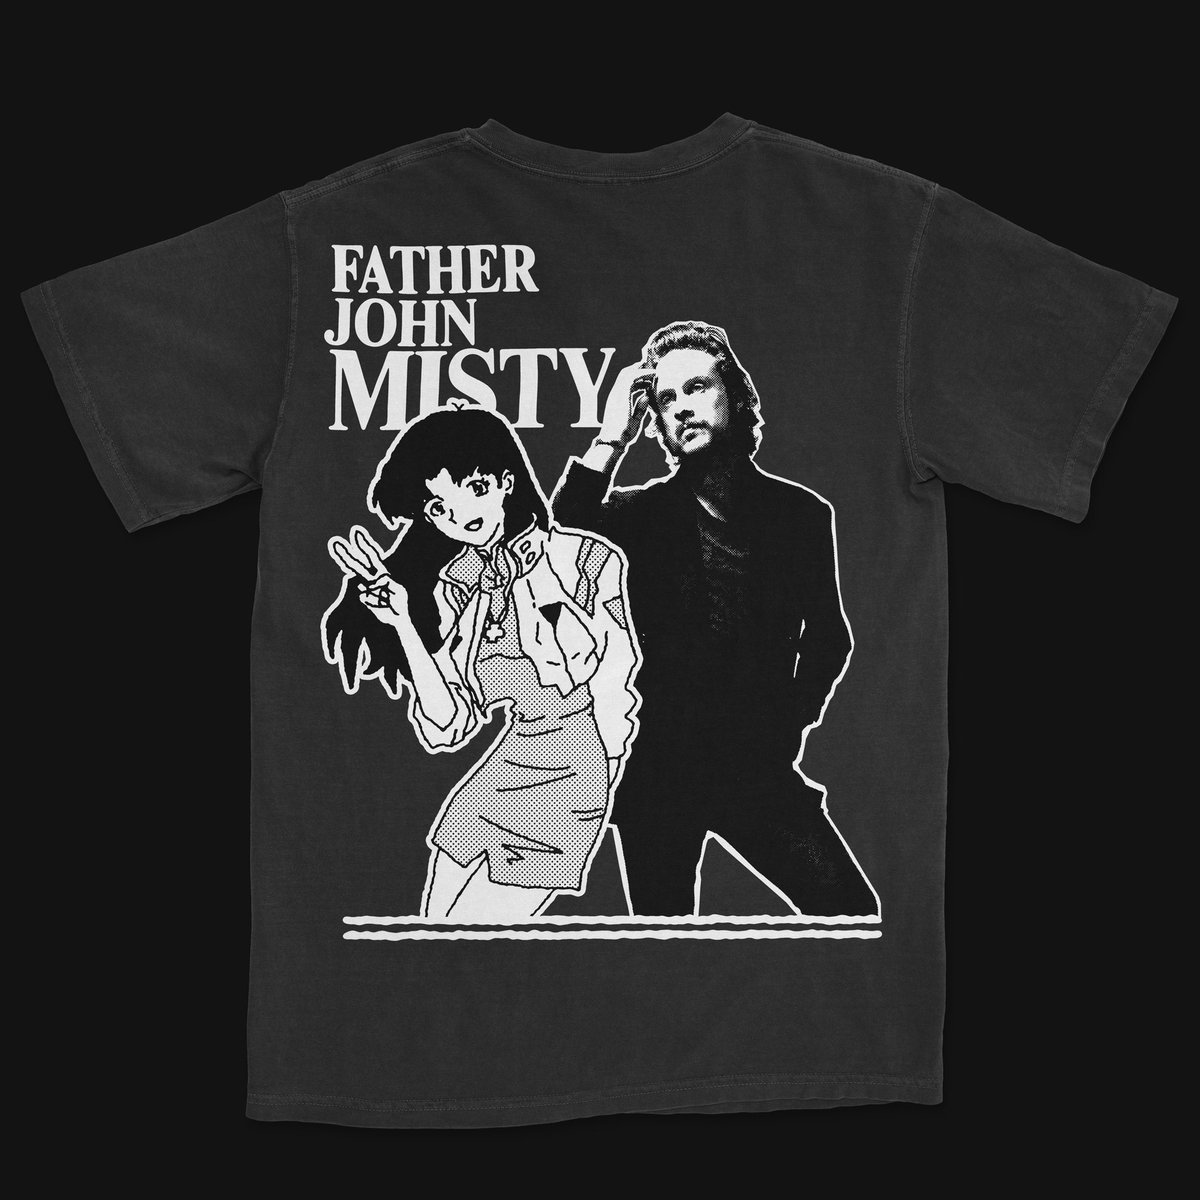 I got to design a tee for @fatherjohnmisty !!!!!! So honored :)